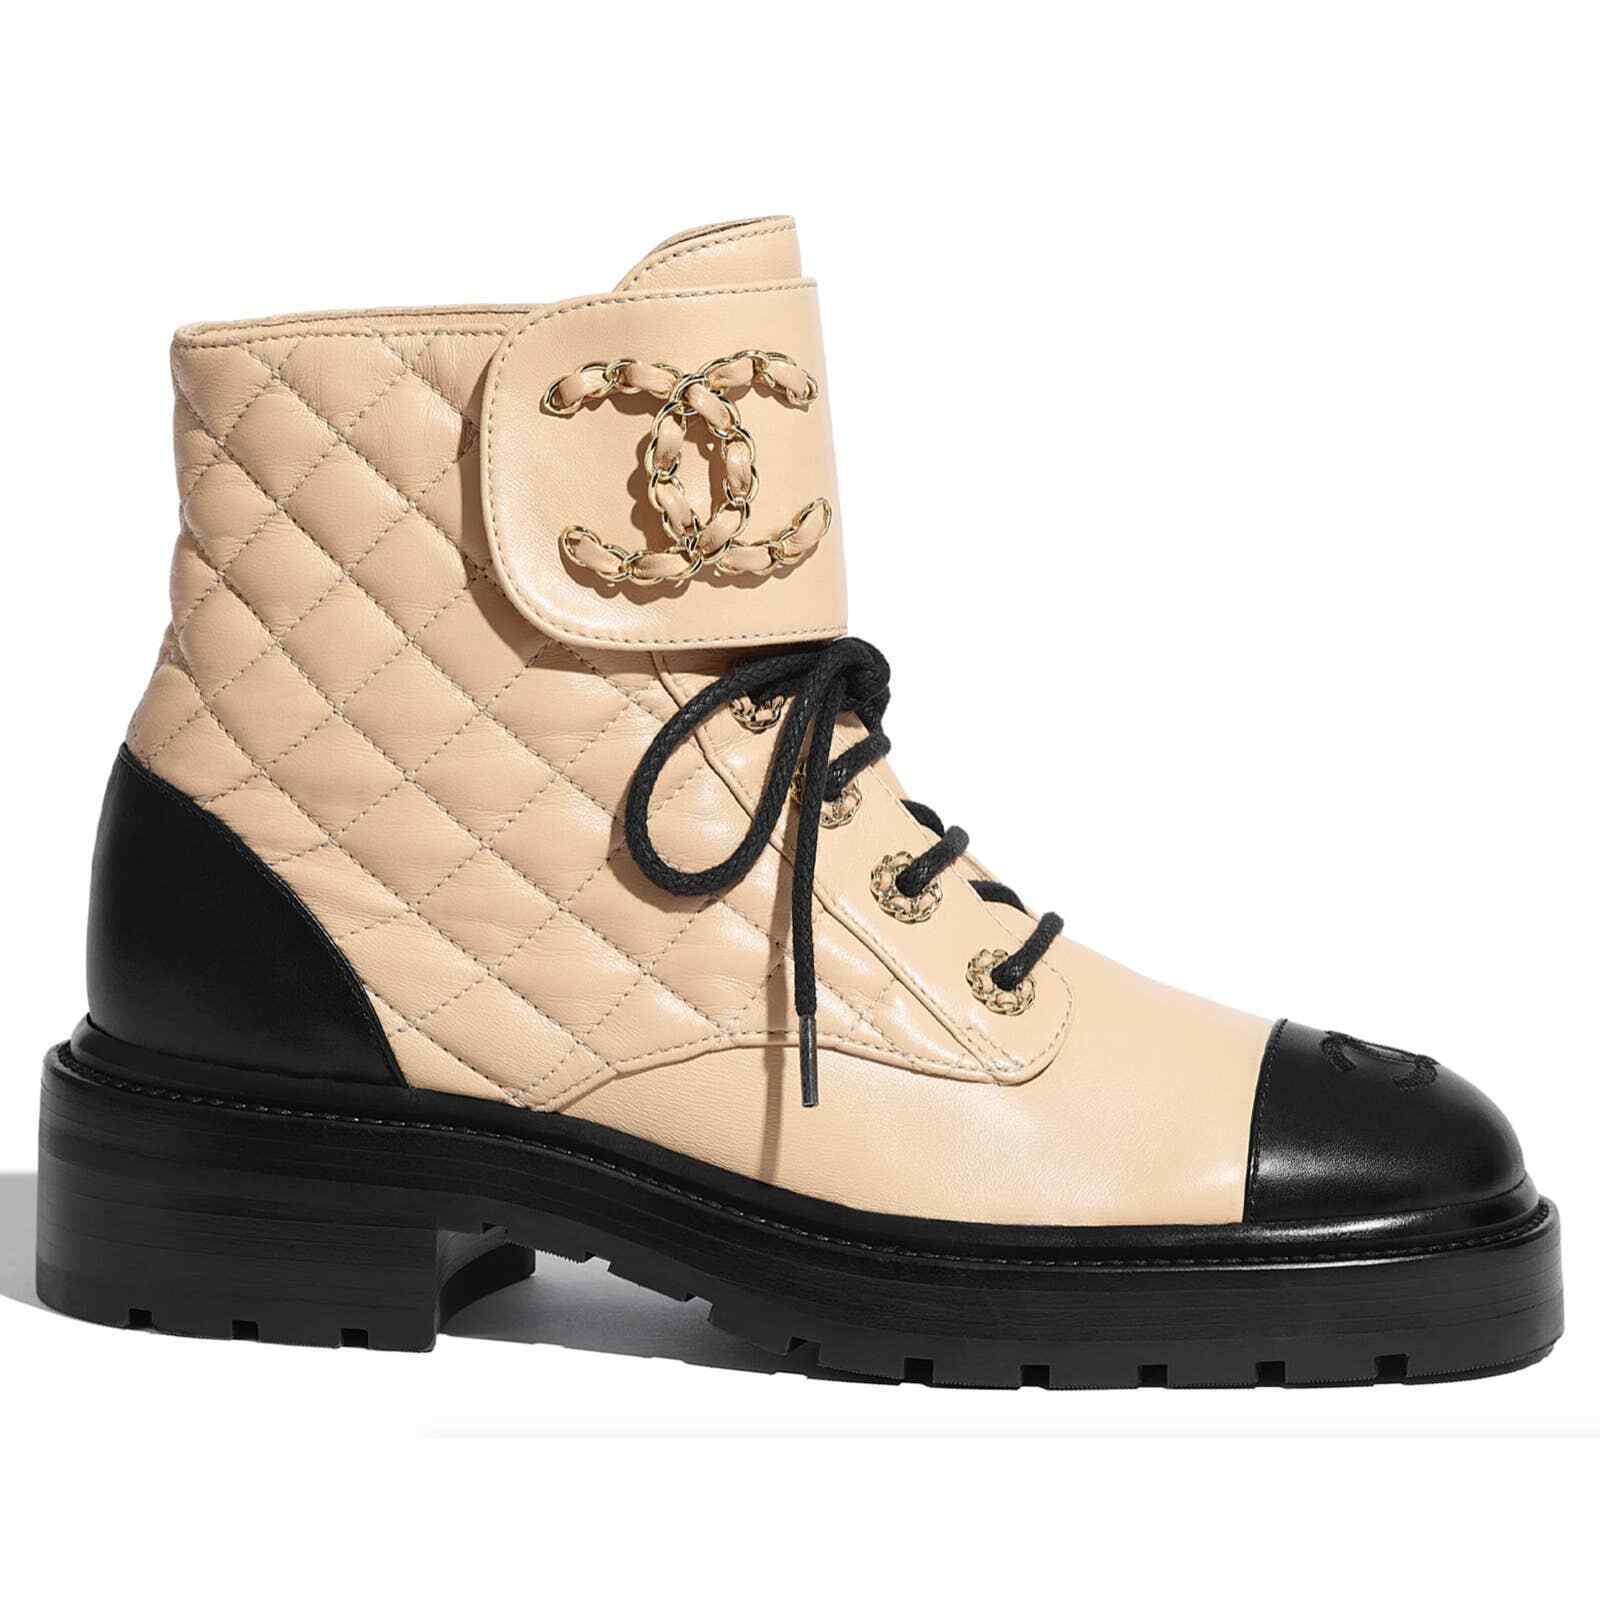 Chanel Authenticated Boots